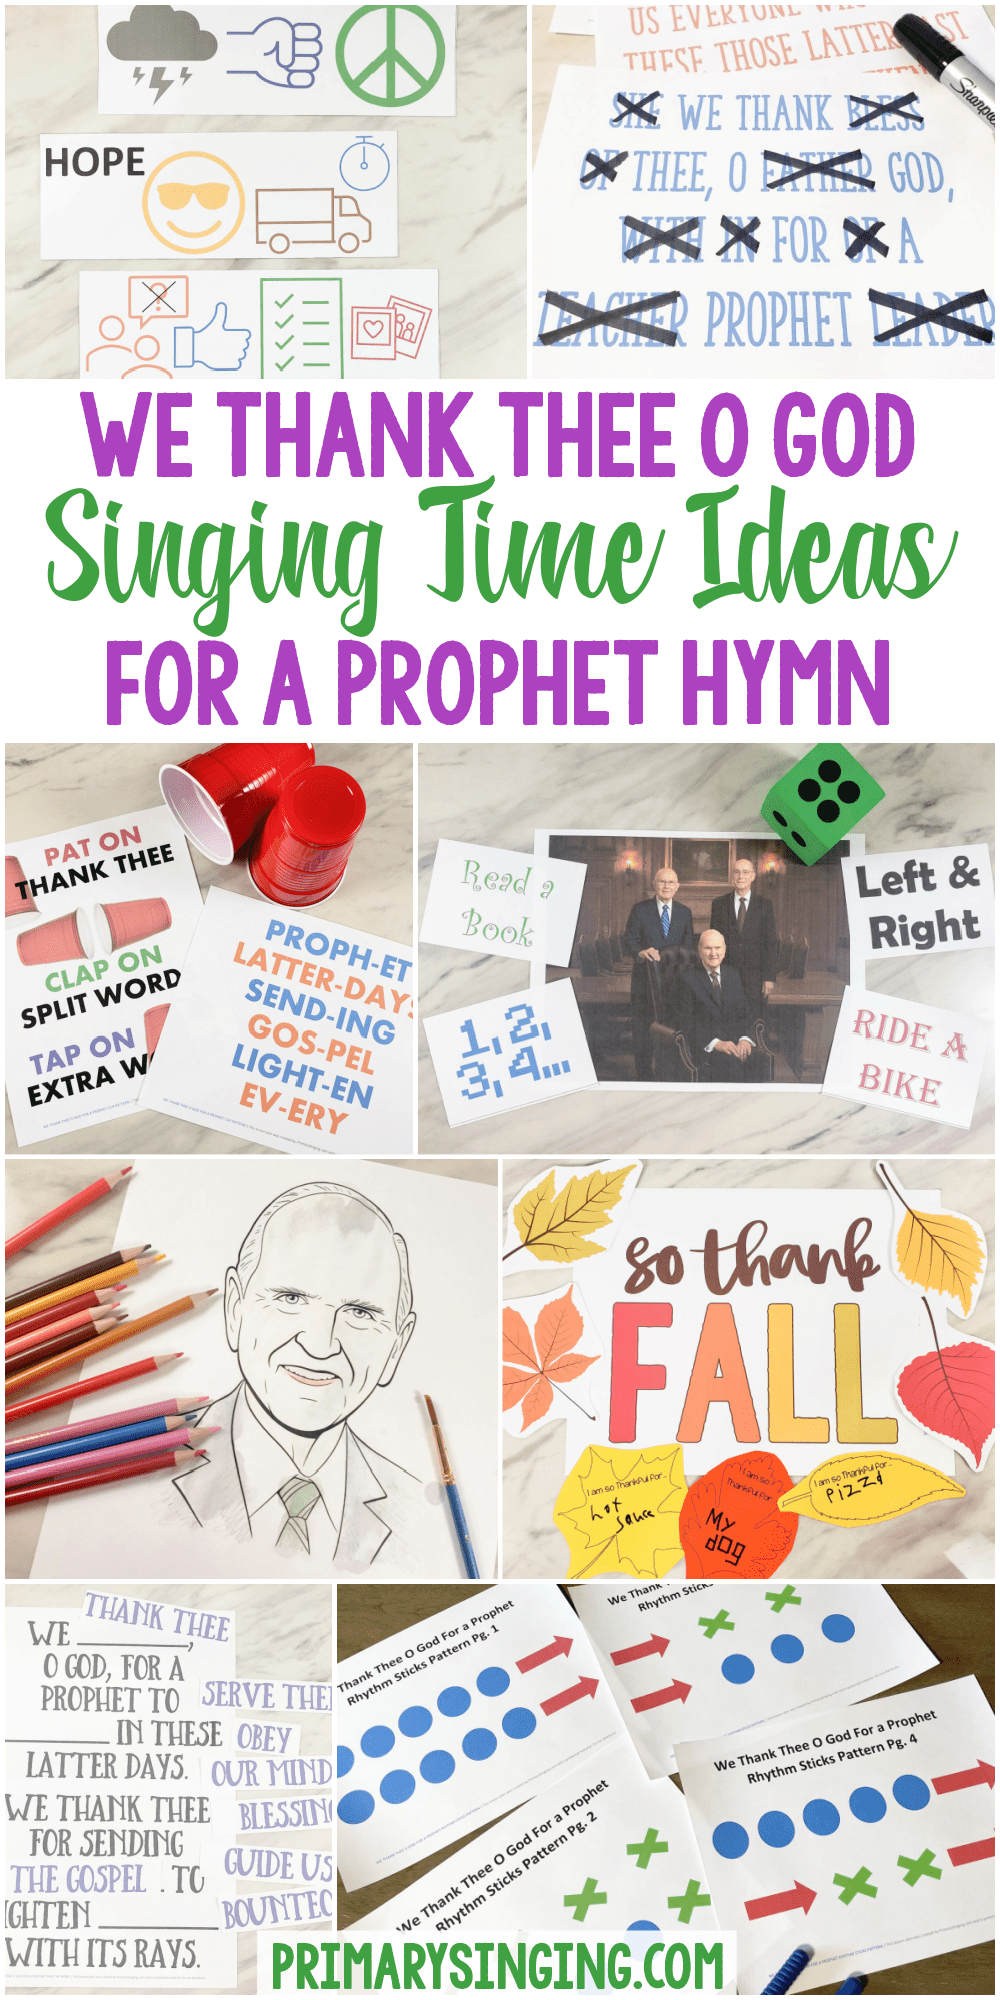 25 We Thank Thee O God for a Prophet Singing Time ideas for LDS Hymn #116! Fun ways to teach this hymn for LDS Primary Music Leaders. Try the cup pattern, rhythm sticks, find the word, rebus, and lots more fun teaching activities and printable song helps!